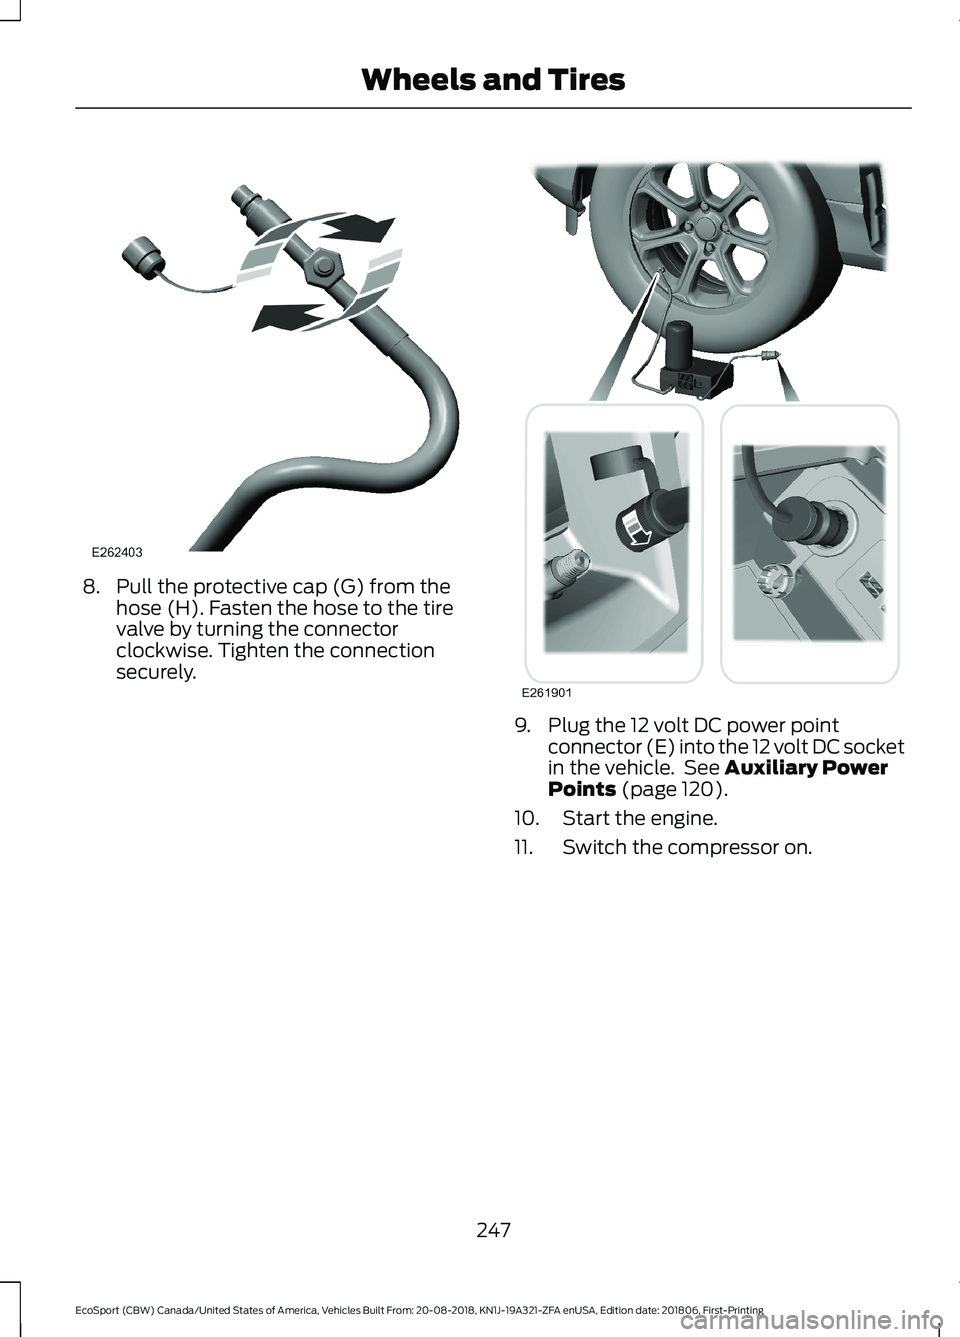 FORD ECOSPORT 2019  Owners Manual 8.Pull the protective cap (G) from thehose (H). Fasten the hose to the tirevalve by turning the connectorclockwise. Tighten the connectionsecurely.
9.Plug the 12 volt DC power pointconnector (E) into 